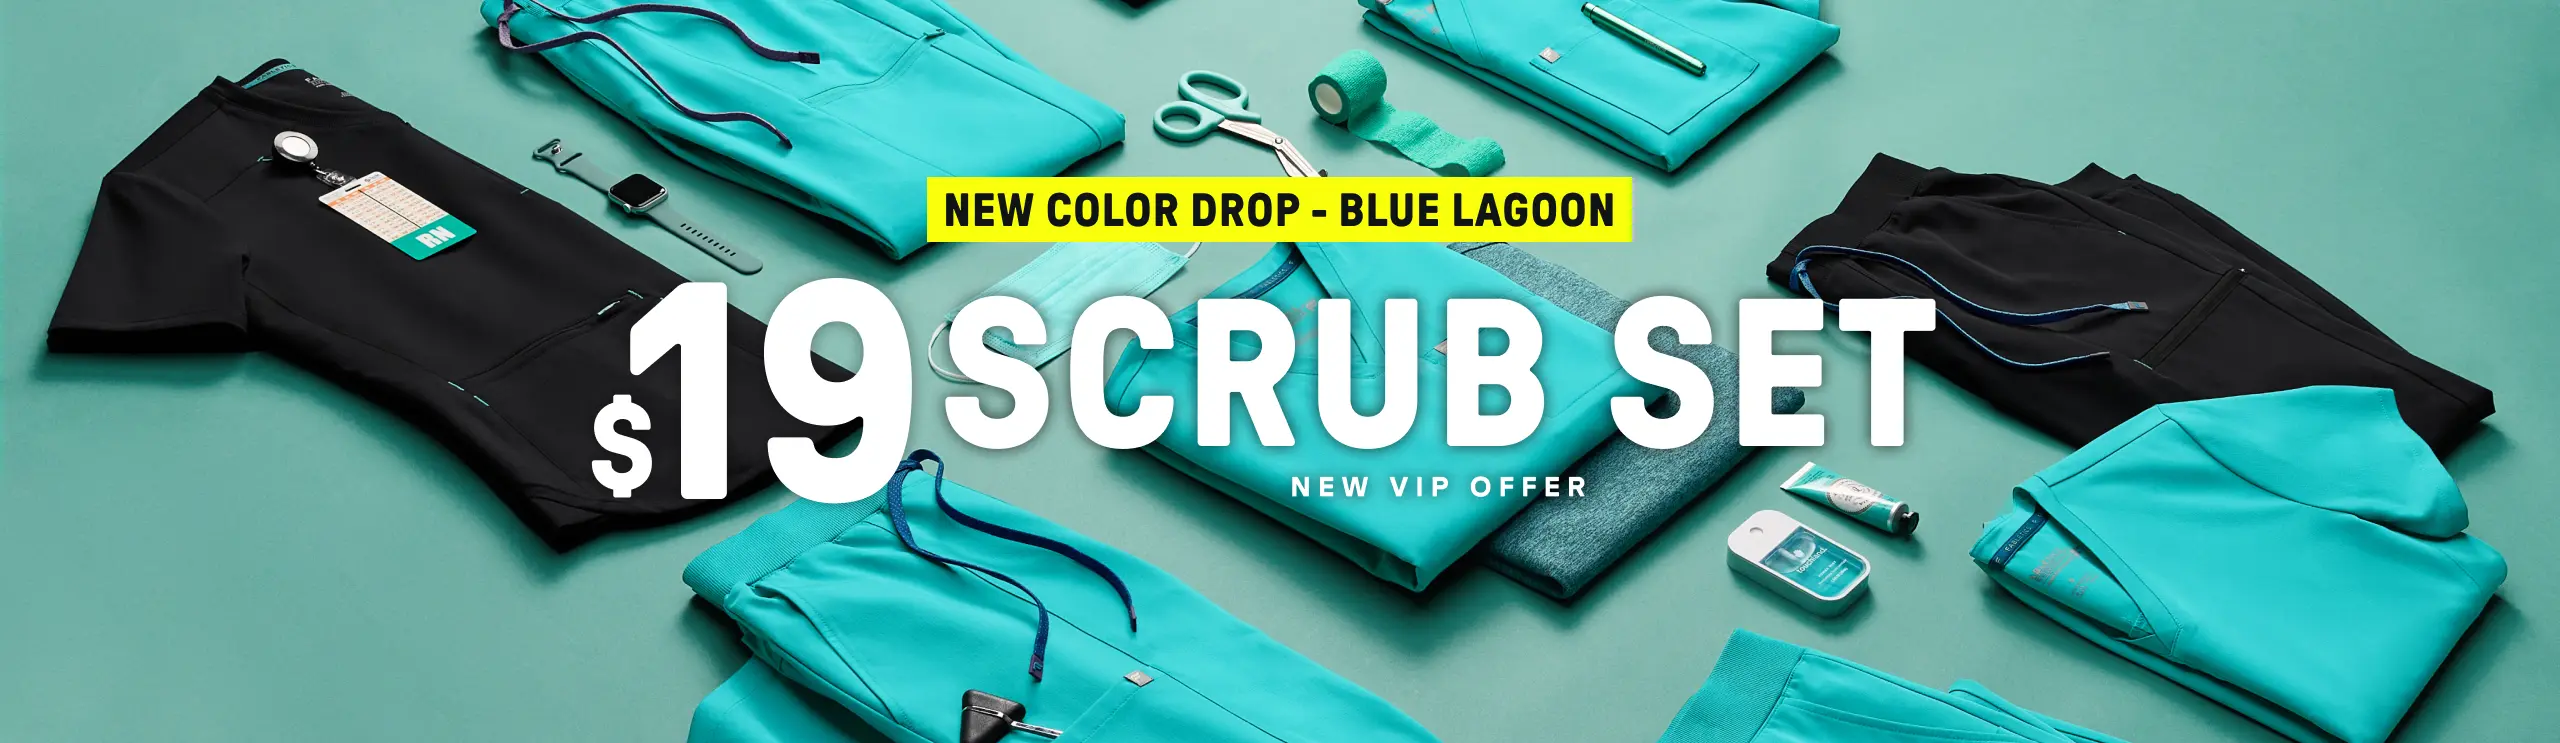 New Color Drop: Blue Lagoon. $19 scrub set when you sign up as a new VIP member.